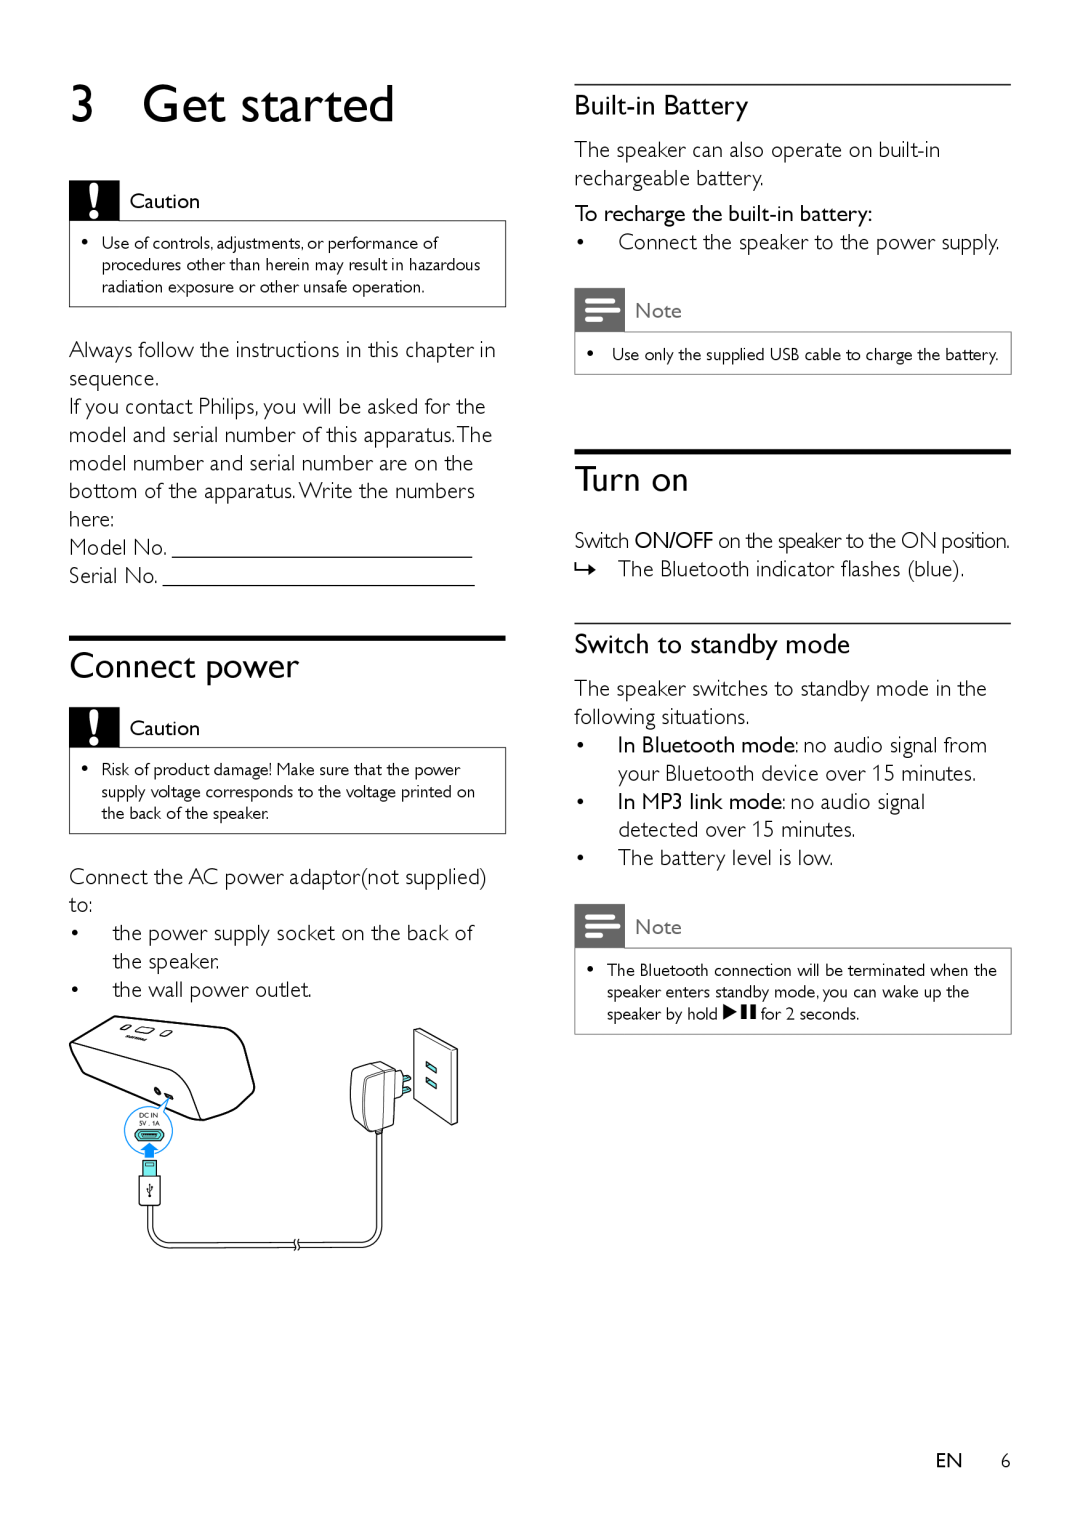 Philips SBT75WHi/93 user manual Get started, Connect power, Turn on, Built-inBattery, Switch to standby mode 